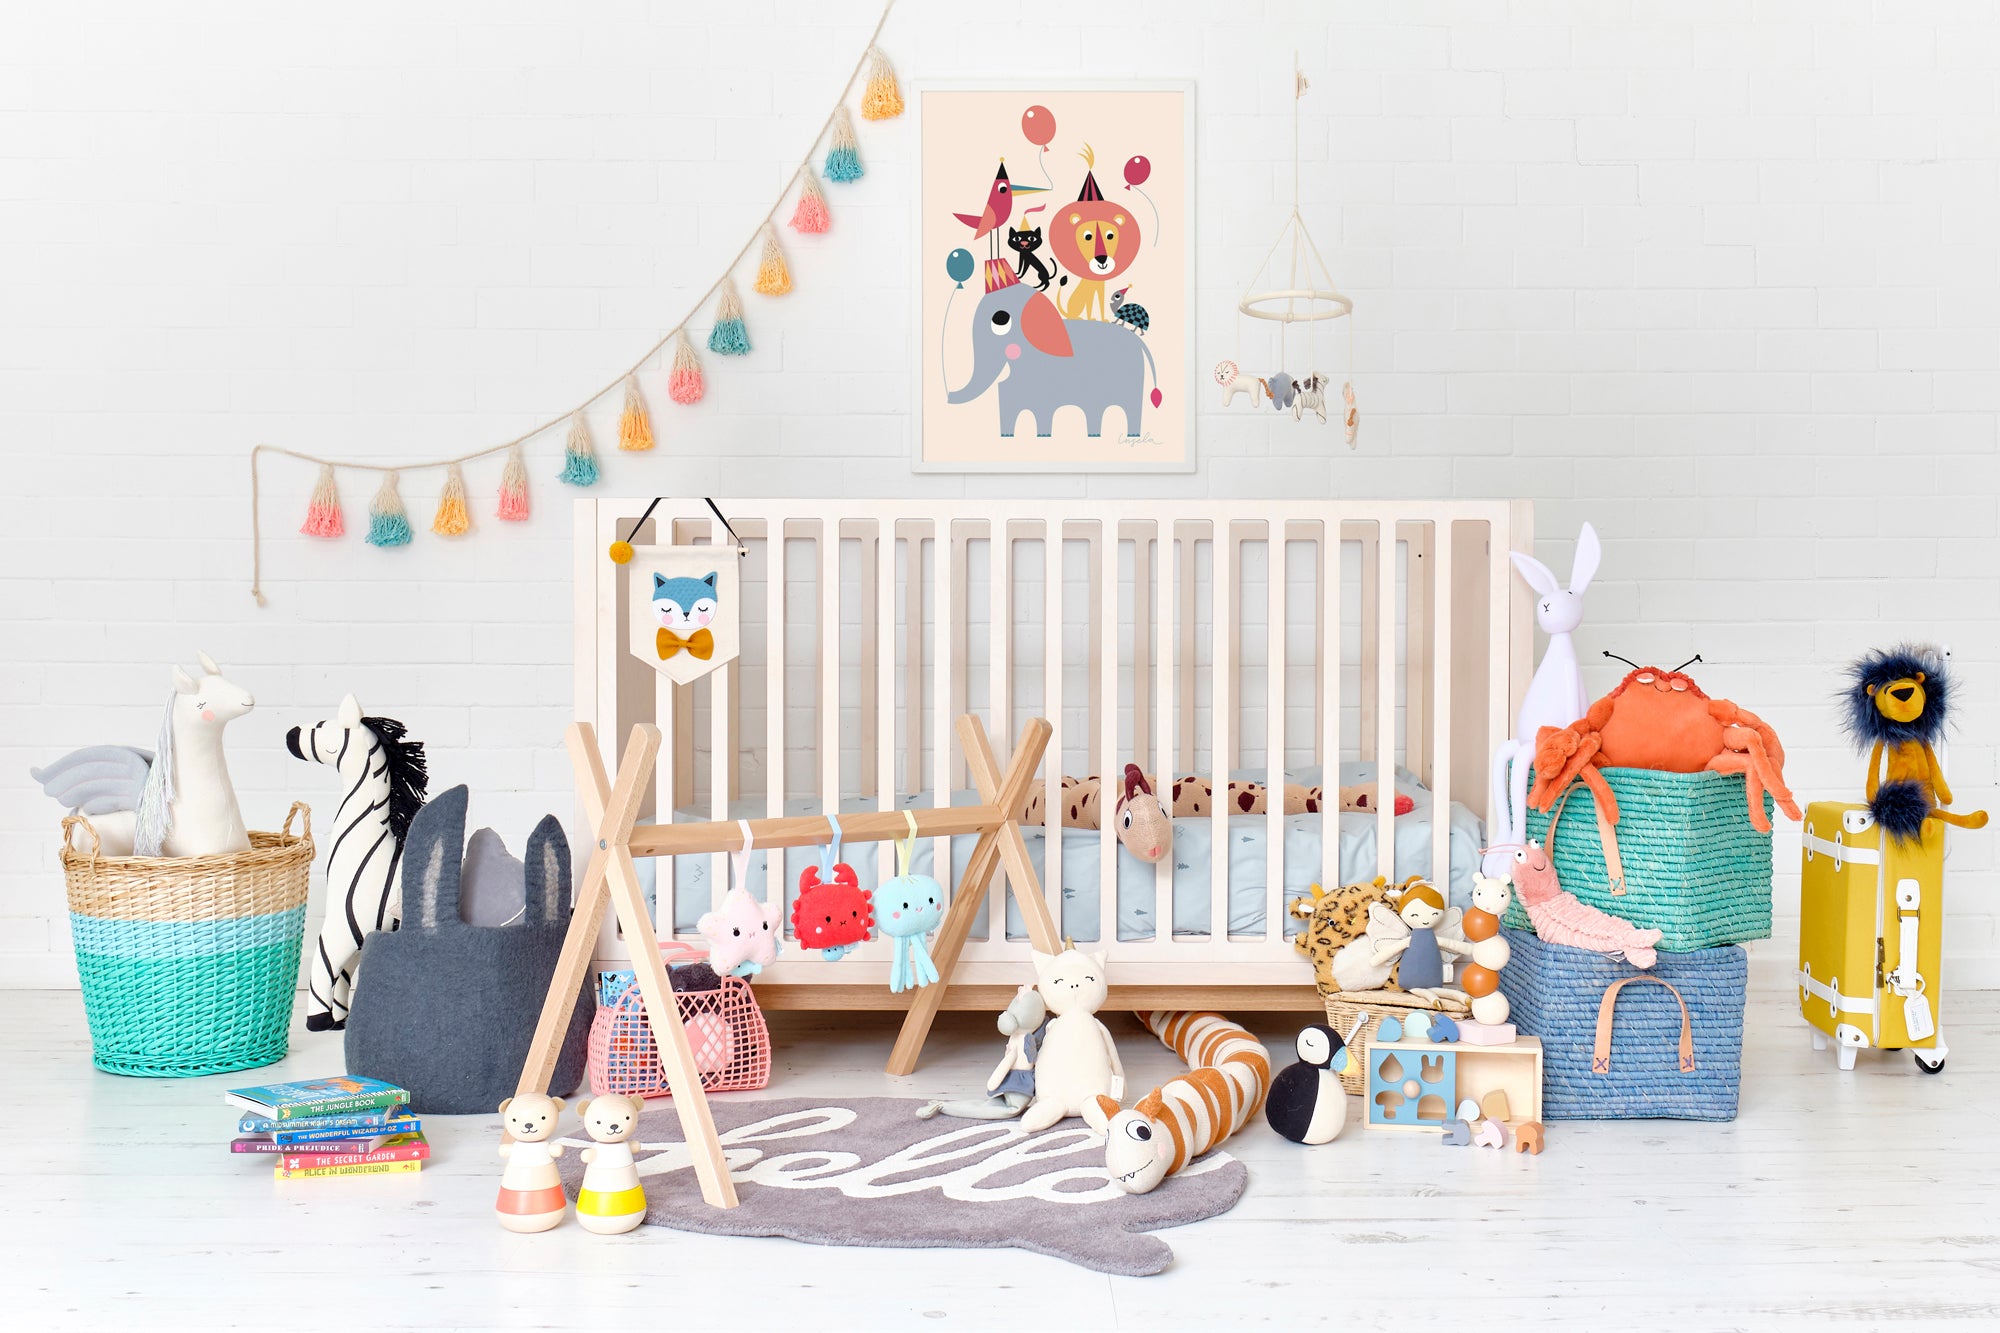 ‘One Big World’ Nursery, Toys and Accessories, styled by Bobby Rabbit.